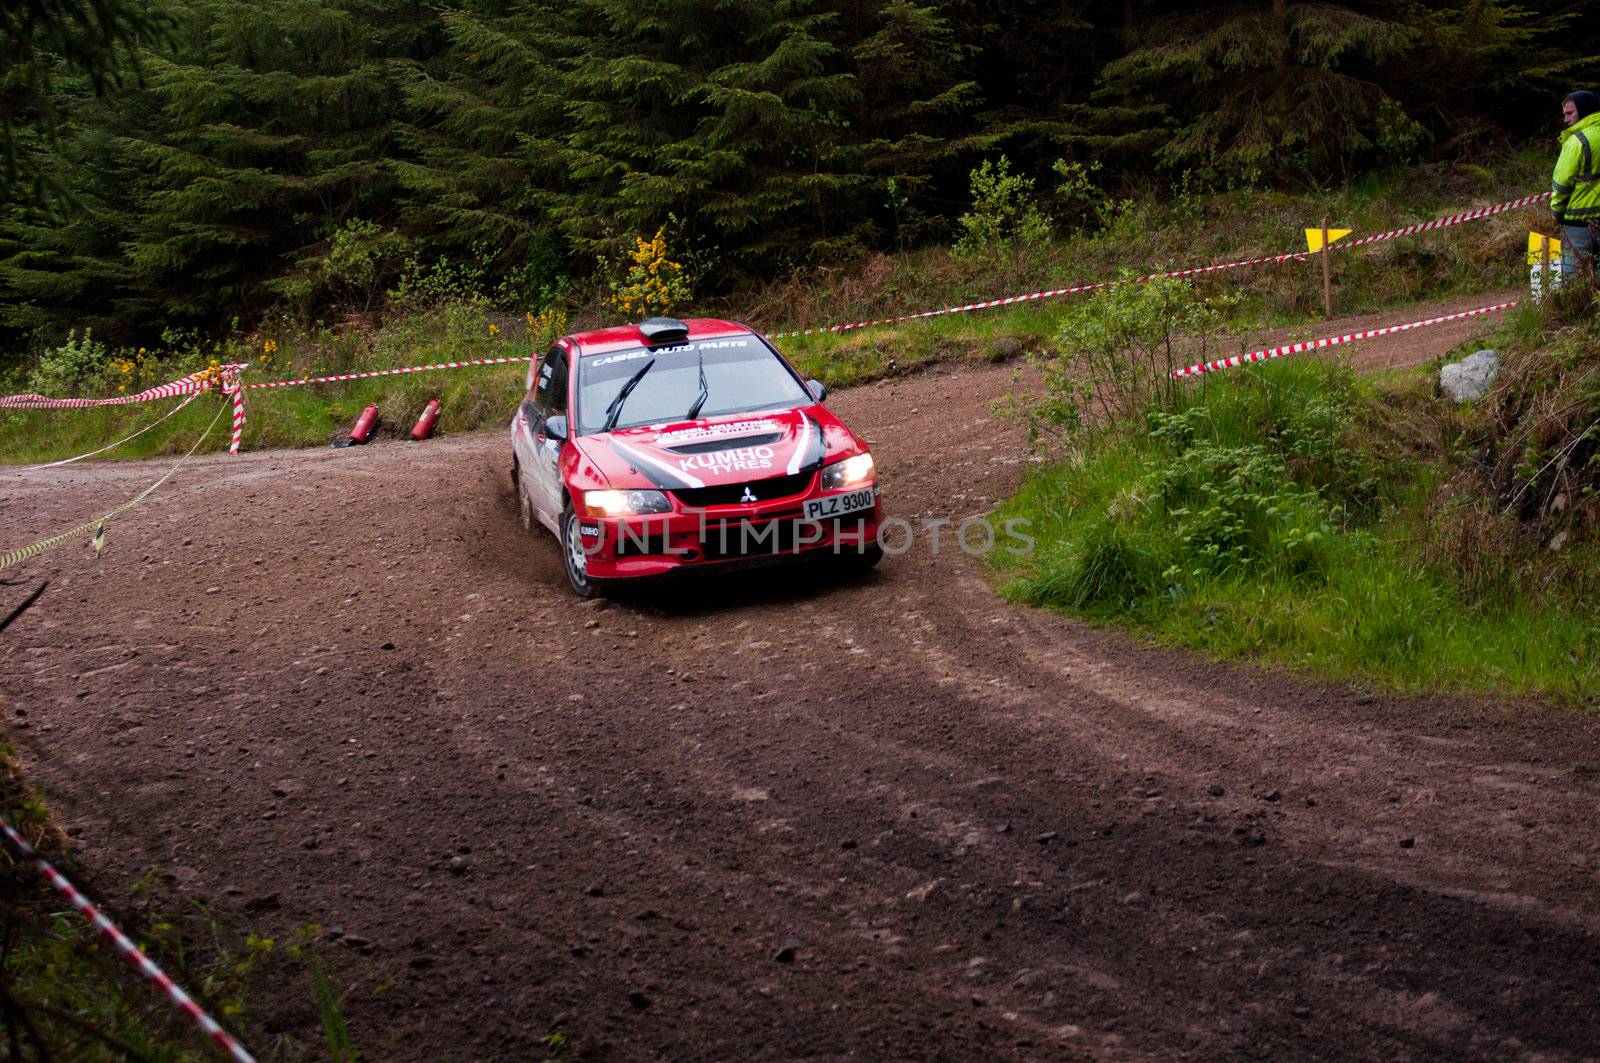 MALLOW, IRELAND - MAY 19: P. O' Connell driving Mitsubishi Evo at the Jim Walsh Cork Forest Rally on May 19, 2012 in Mallow, Ireland. 4th round of the Valvoline National Forest Rally Championship.